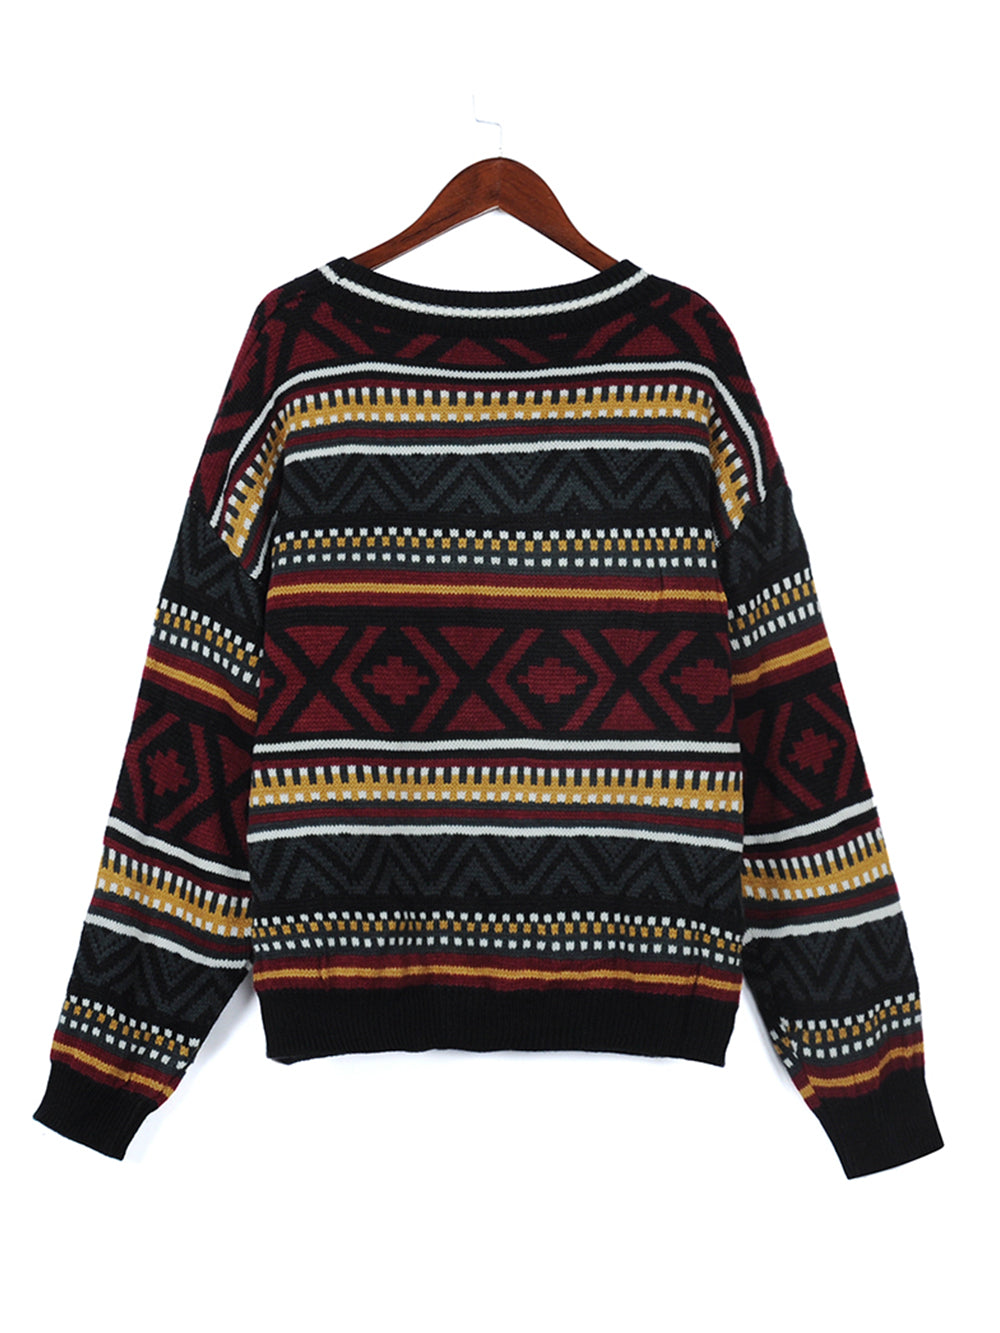 Nomad Knit Sweater